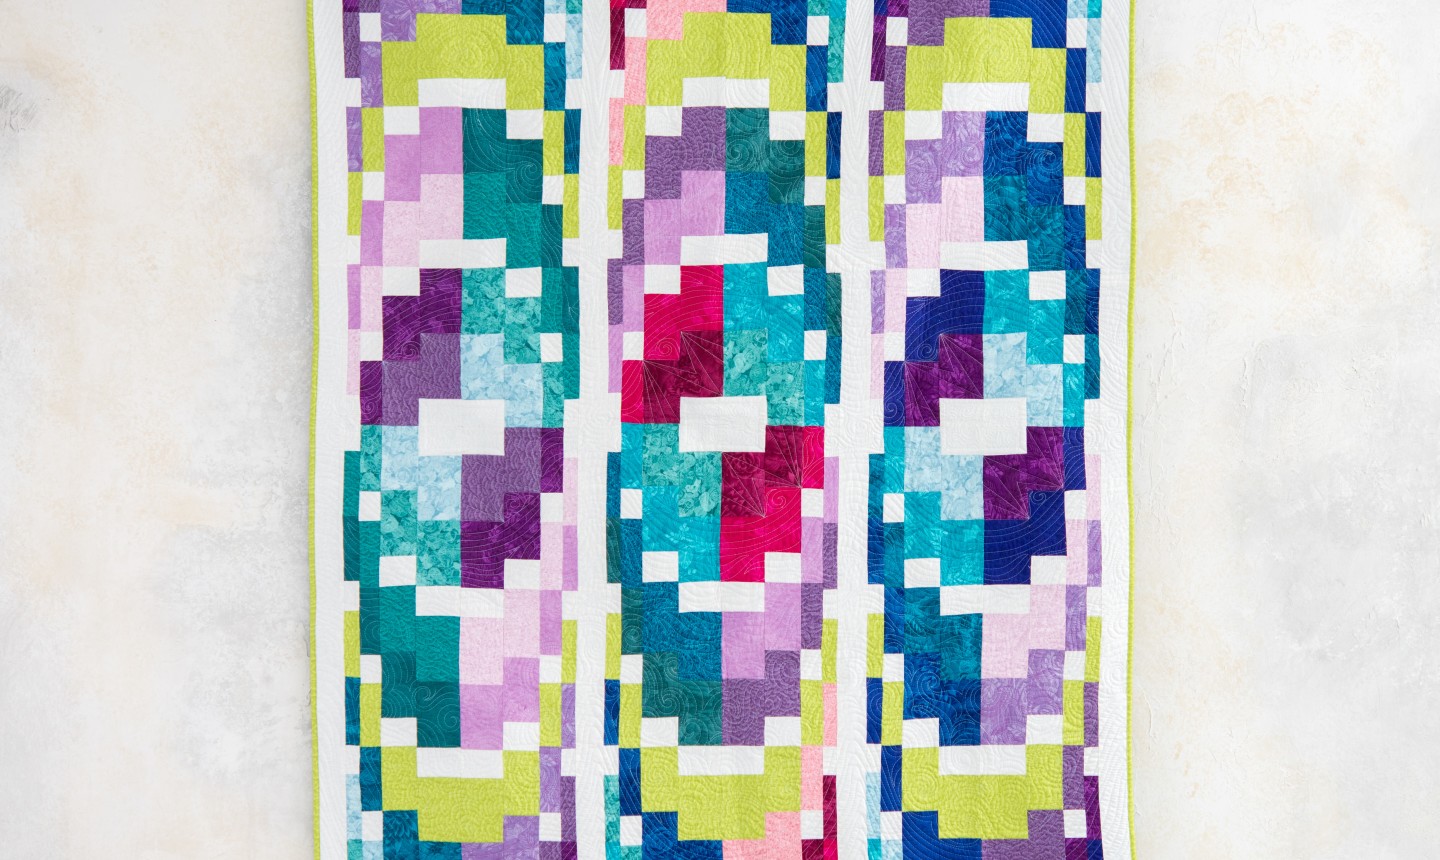 How Much Material Is Needed For A Small Bargello Quilt?